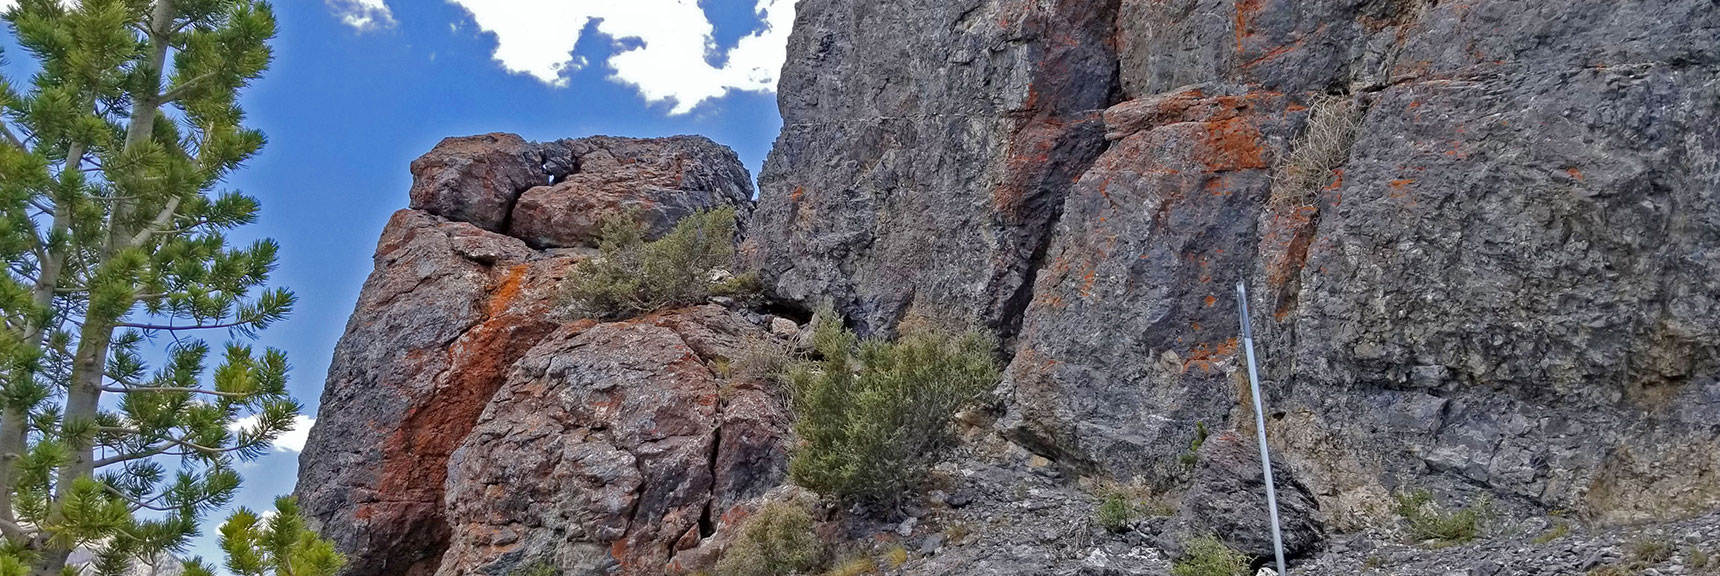 3rd Class 3 Summit Approach on NE Side of Black Rock Sister | Black Rock Sister | Mt Charleston Wilderness | Lee Canyon | Spring Mountains, Nevada